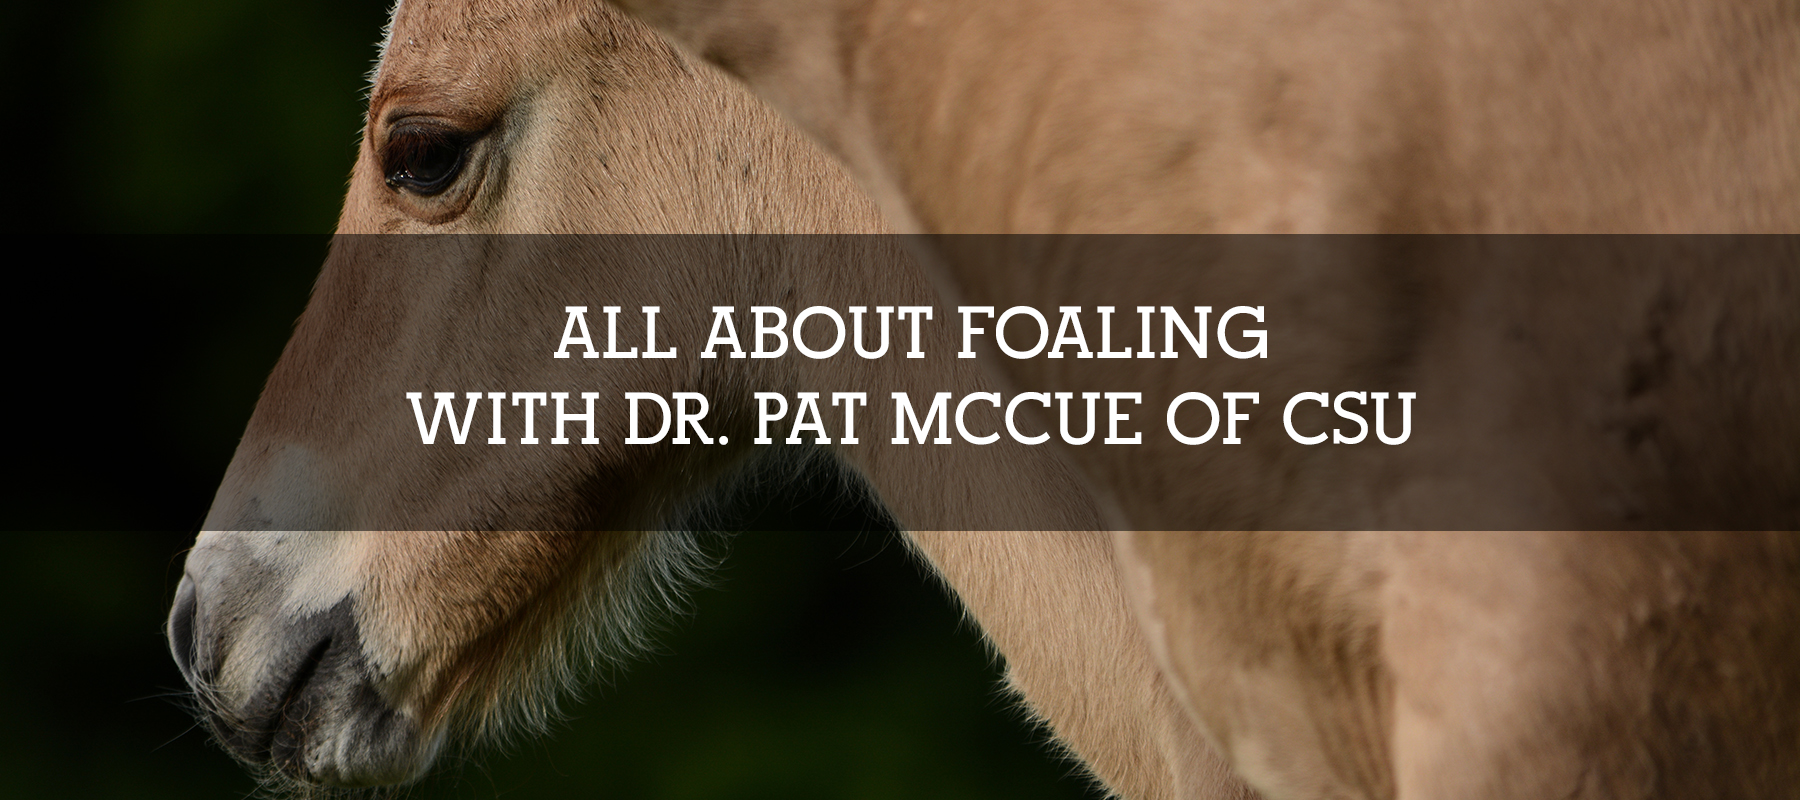 ALL ABOUT FOALING WITH DR. PAT MCCUE OF CSU